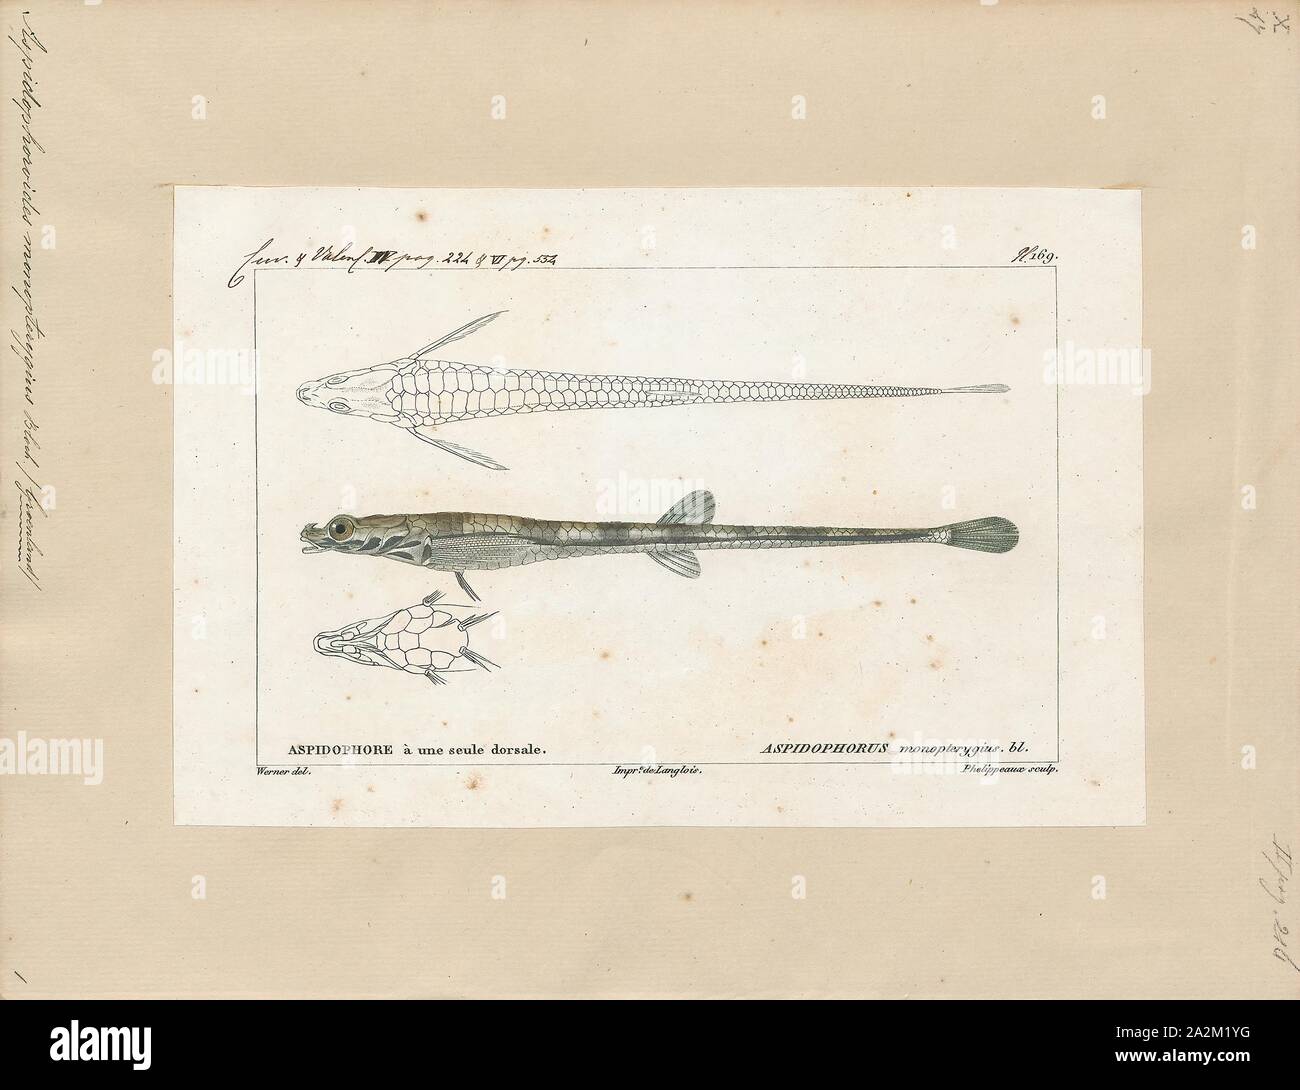 Aspidophoroides monopterygius, Print, The Alligatorfish (Aspidophoroides monopterygius, also known commonly as the Aleutian alligatorfish and the Atlantic alligatorfish) is a fish in the family Agonidae (poachers). It was described by Marcus Elieser Bloch in 1786. It is a marine, temperate water-dwelling fish which is known from the northwestern Atlantic Ocean, including western Greenland; Labrador, Canada; and Cape Cod, Massachusetts, USA. It dwells at a depth range of 0–695 metres, most often around 60–150 m, and inhabits sand and mud bottoms mostly on the lower continental shelf all year Stock Photo